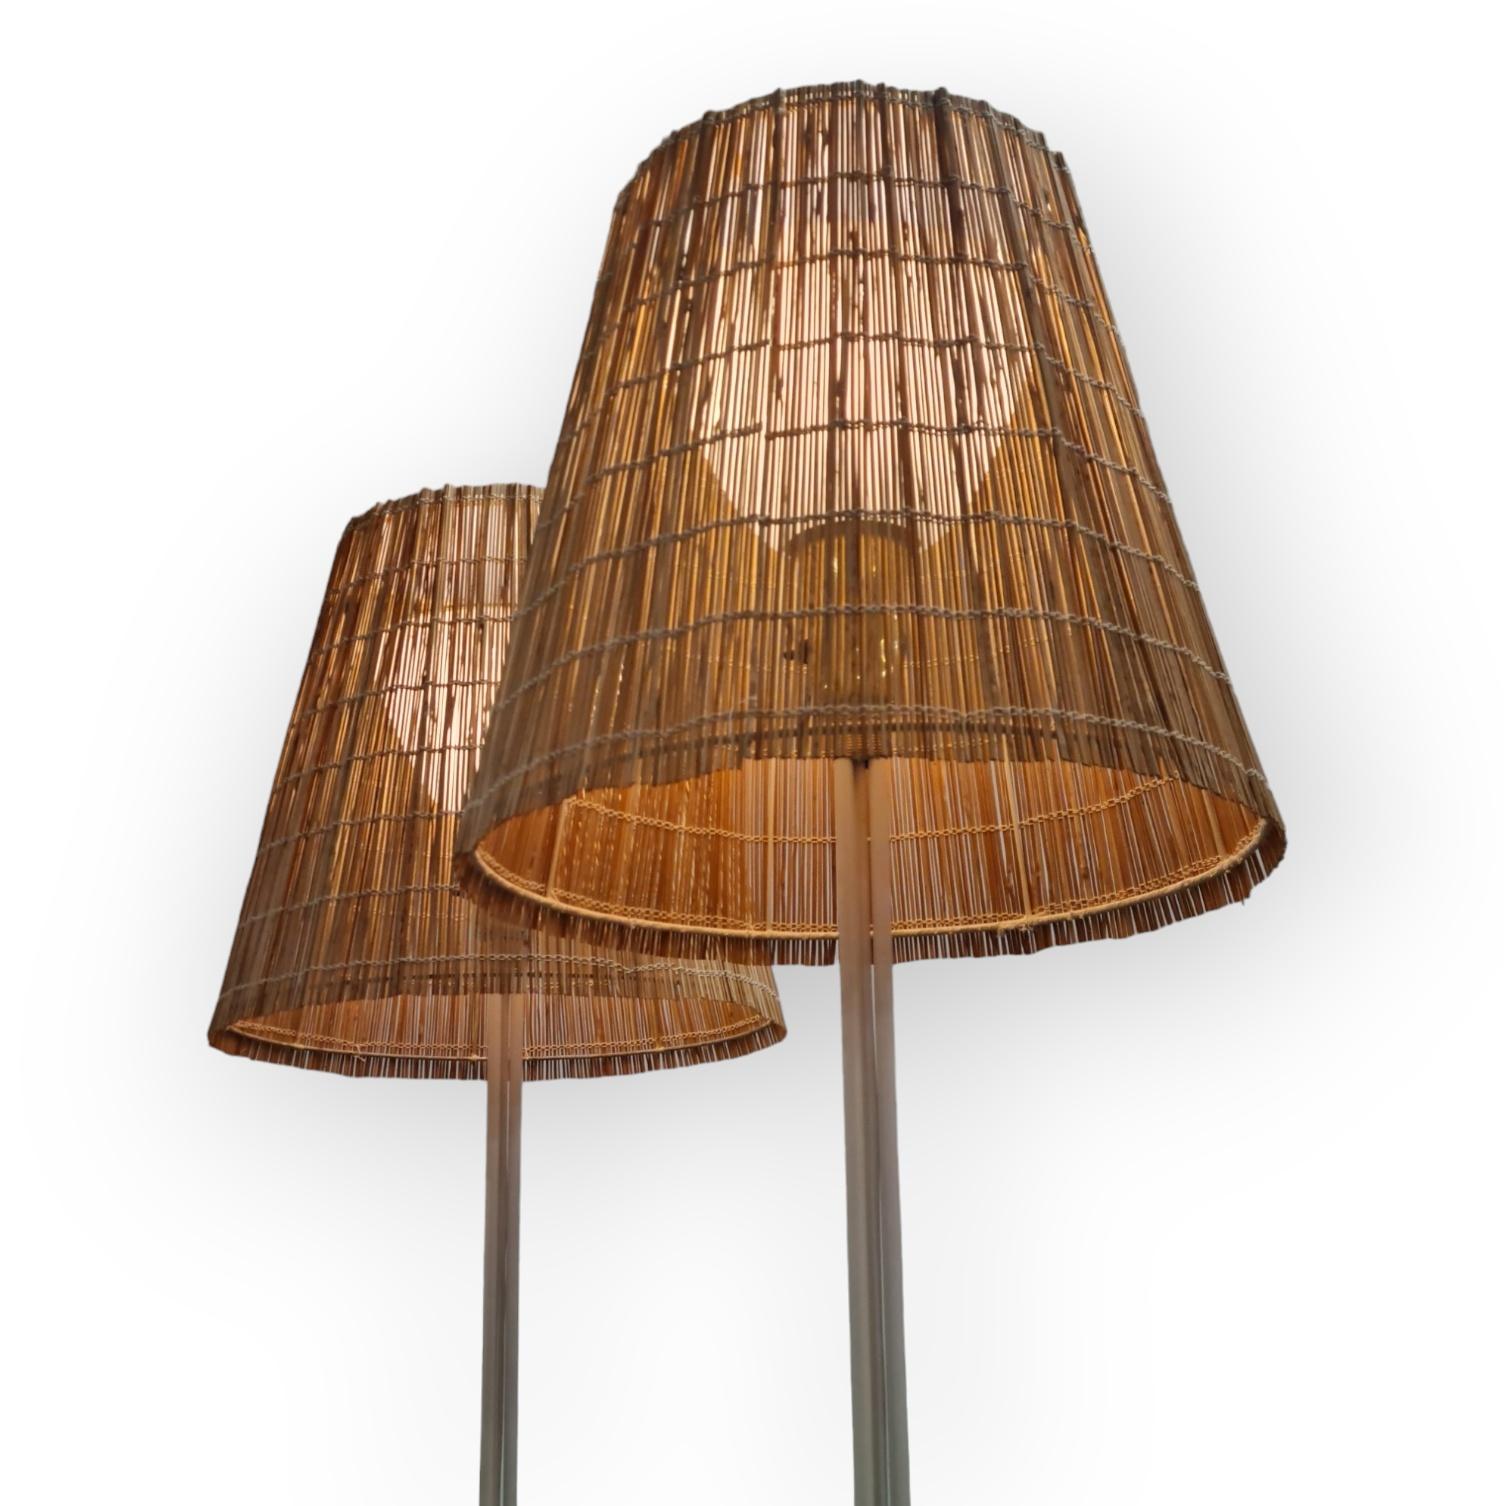 Pair of Lisa Johansson-Papé floor lamps for Orno, model 30-058, 1950s 11